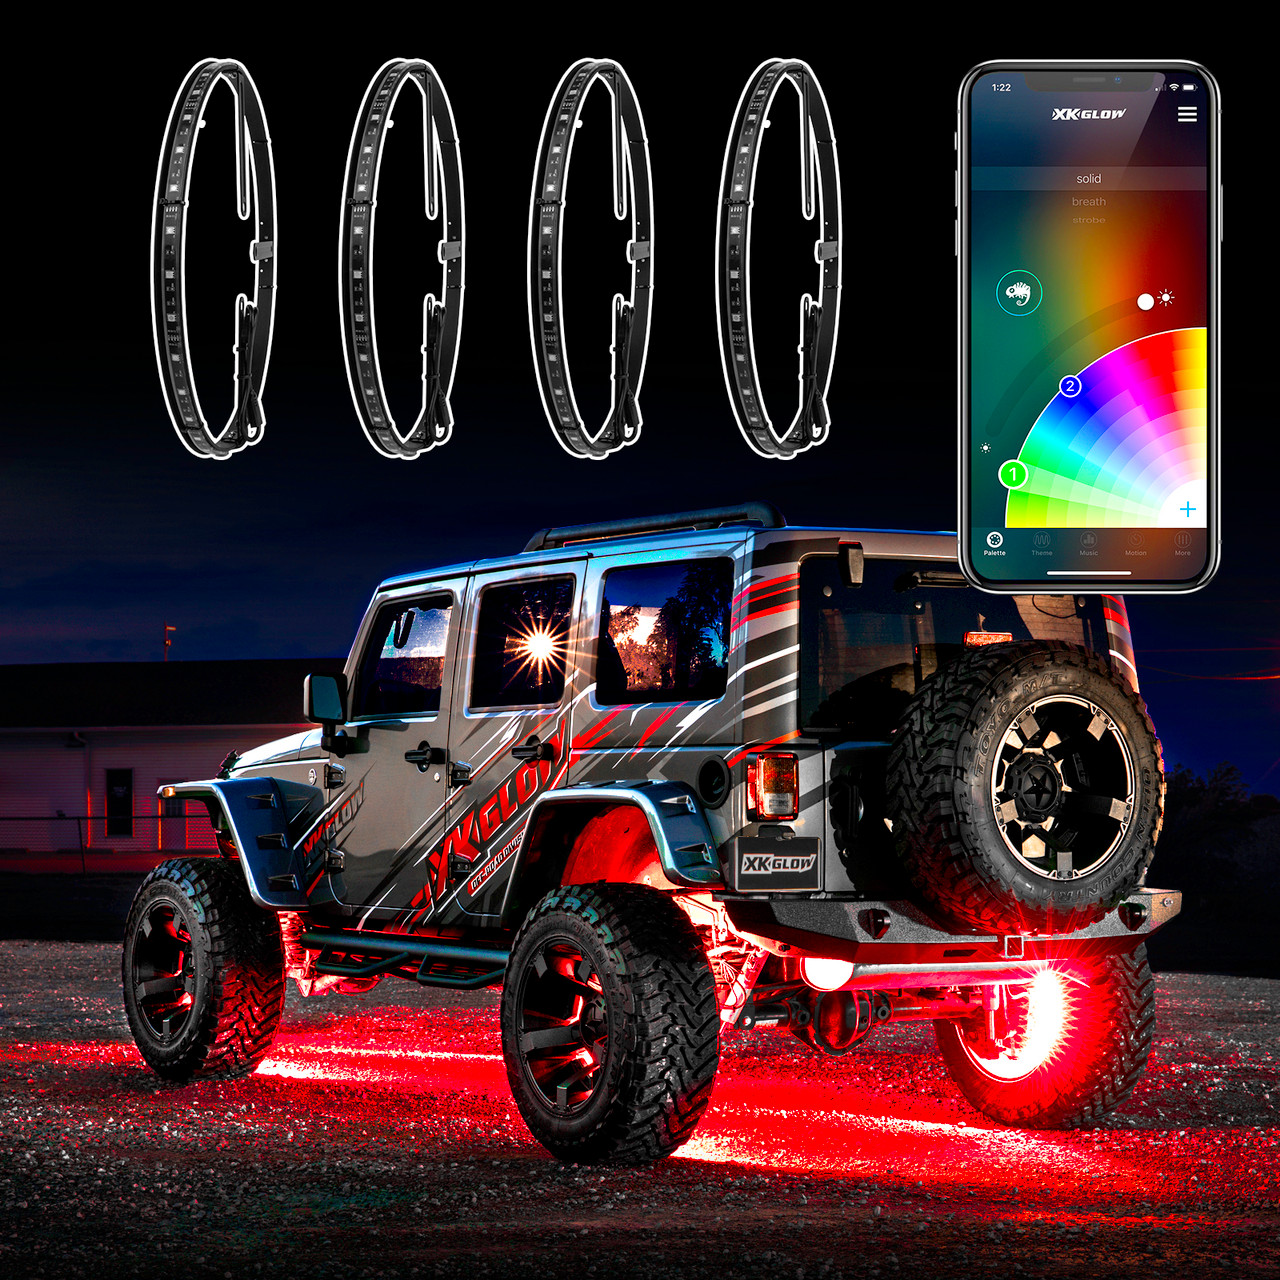 The Best Underglow Car Led Lights [ 2023 Buyer's Guide ] 